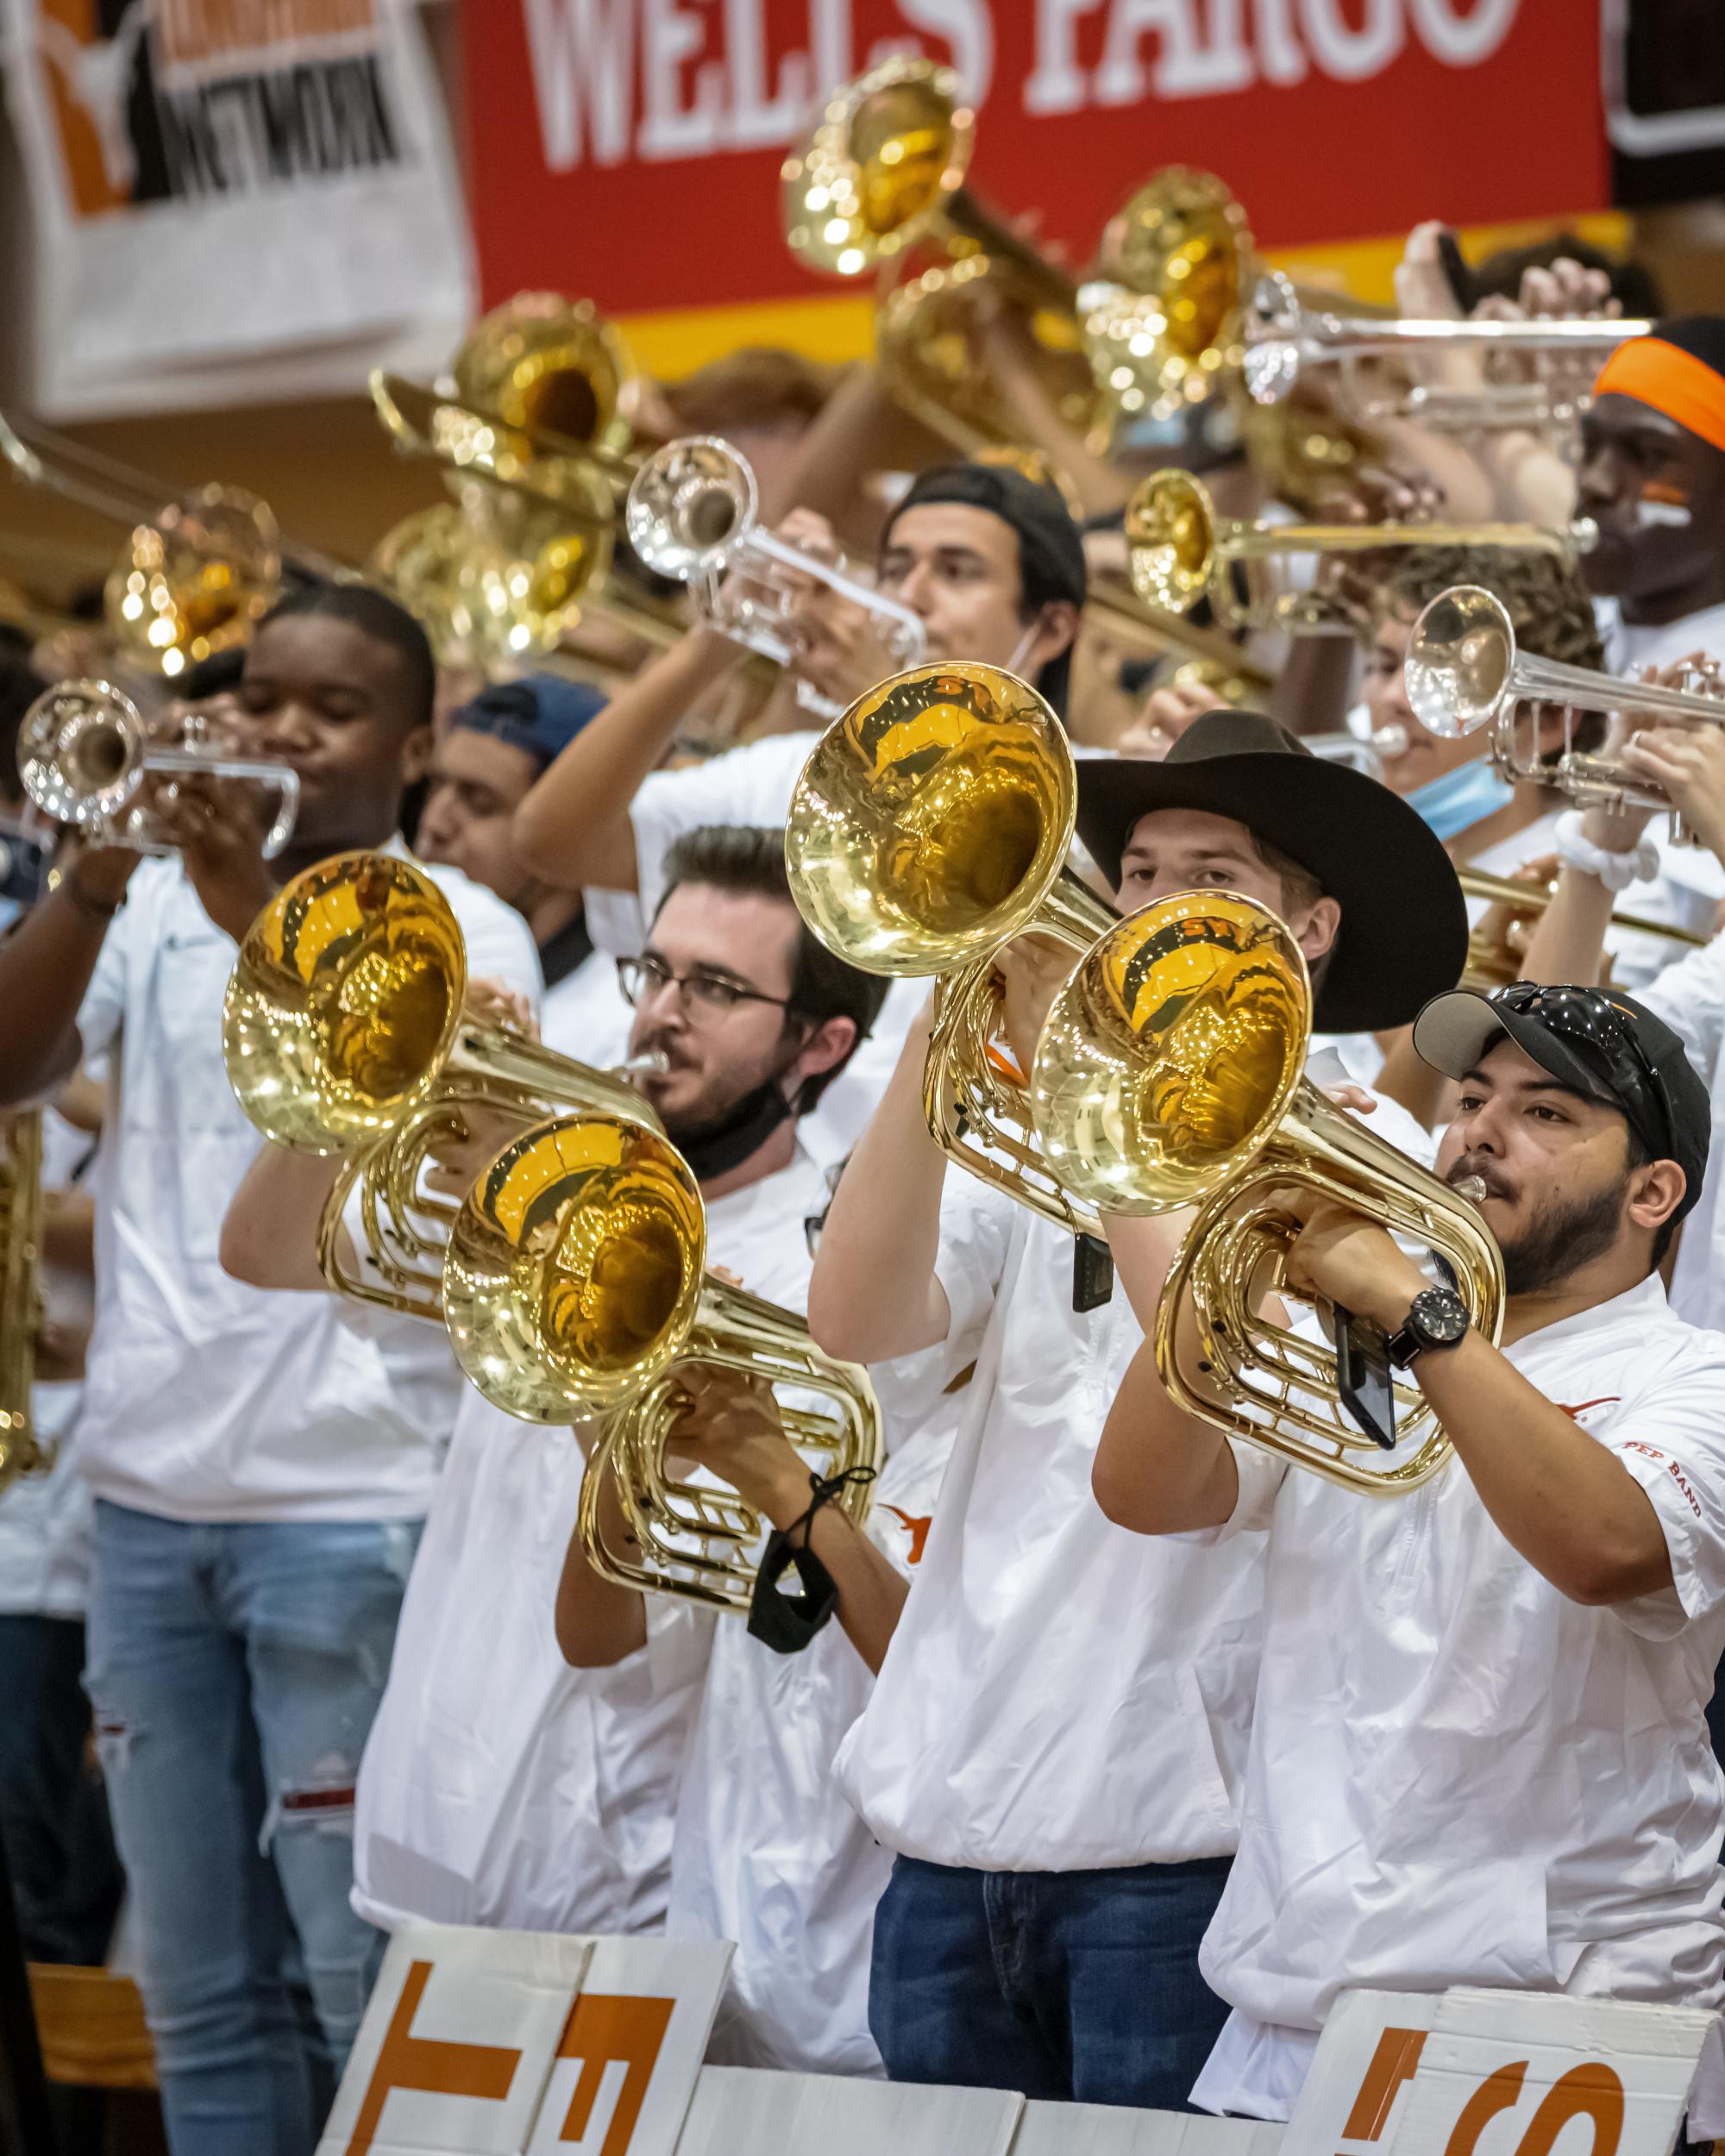 A Line of horns play at a UT Basketball game